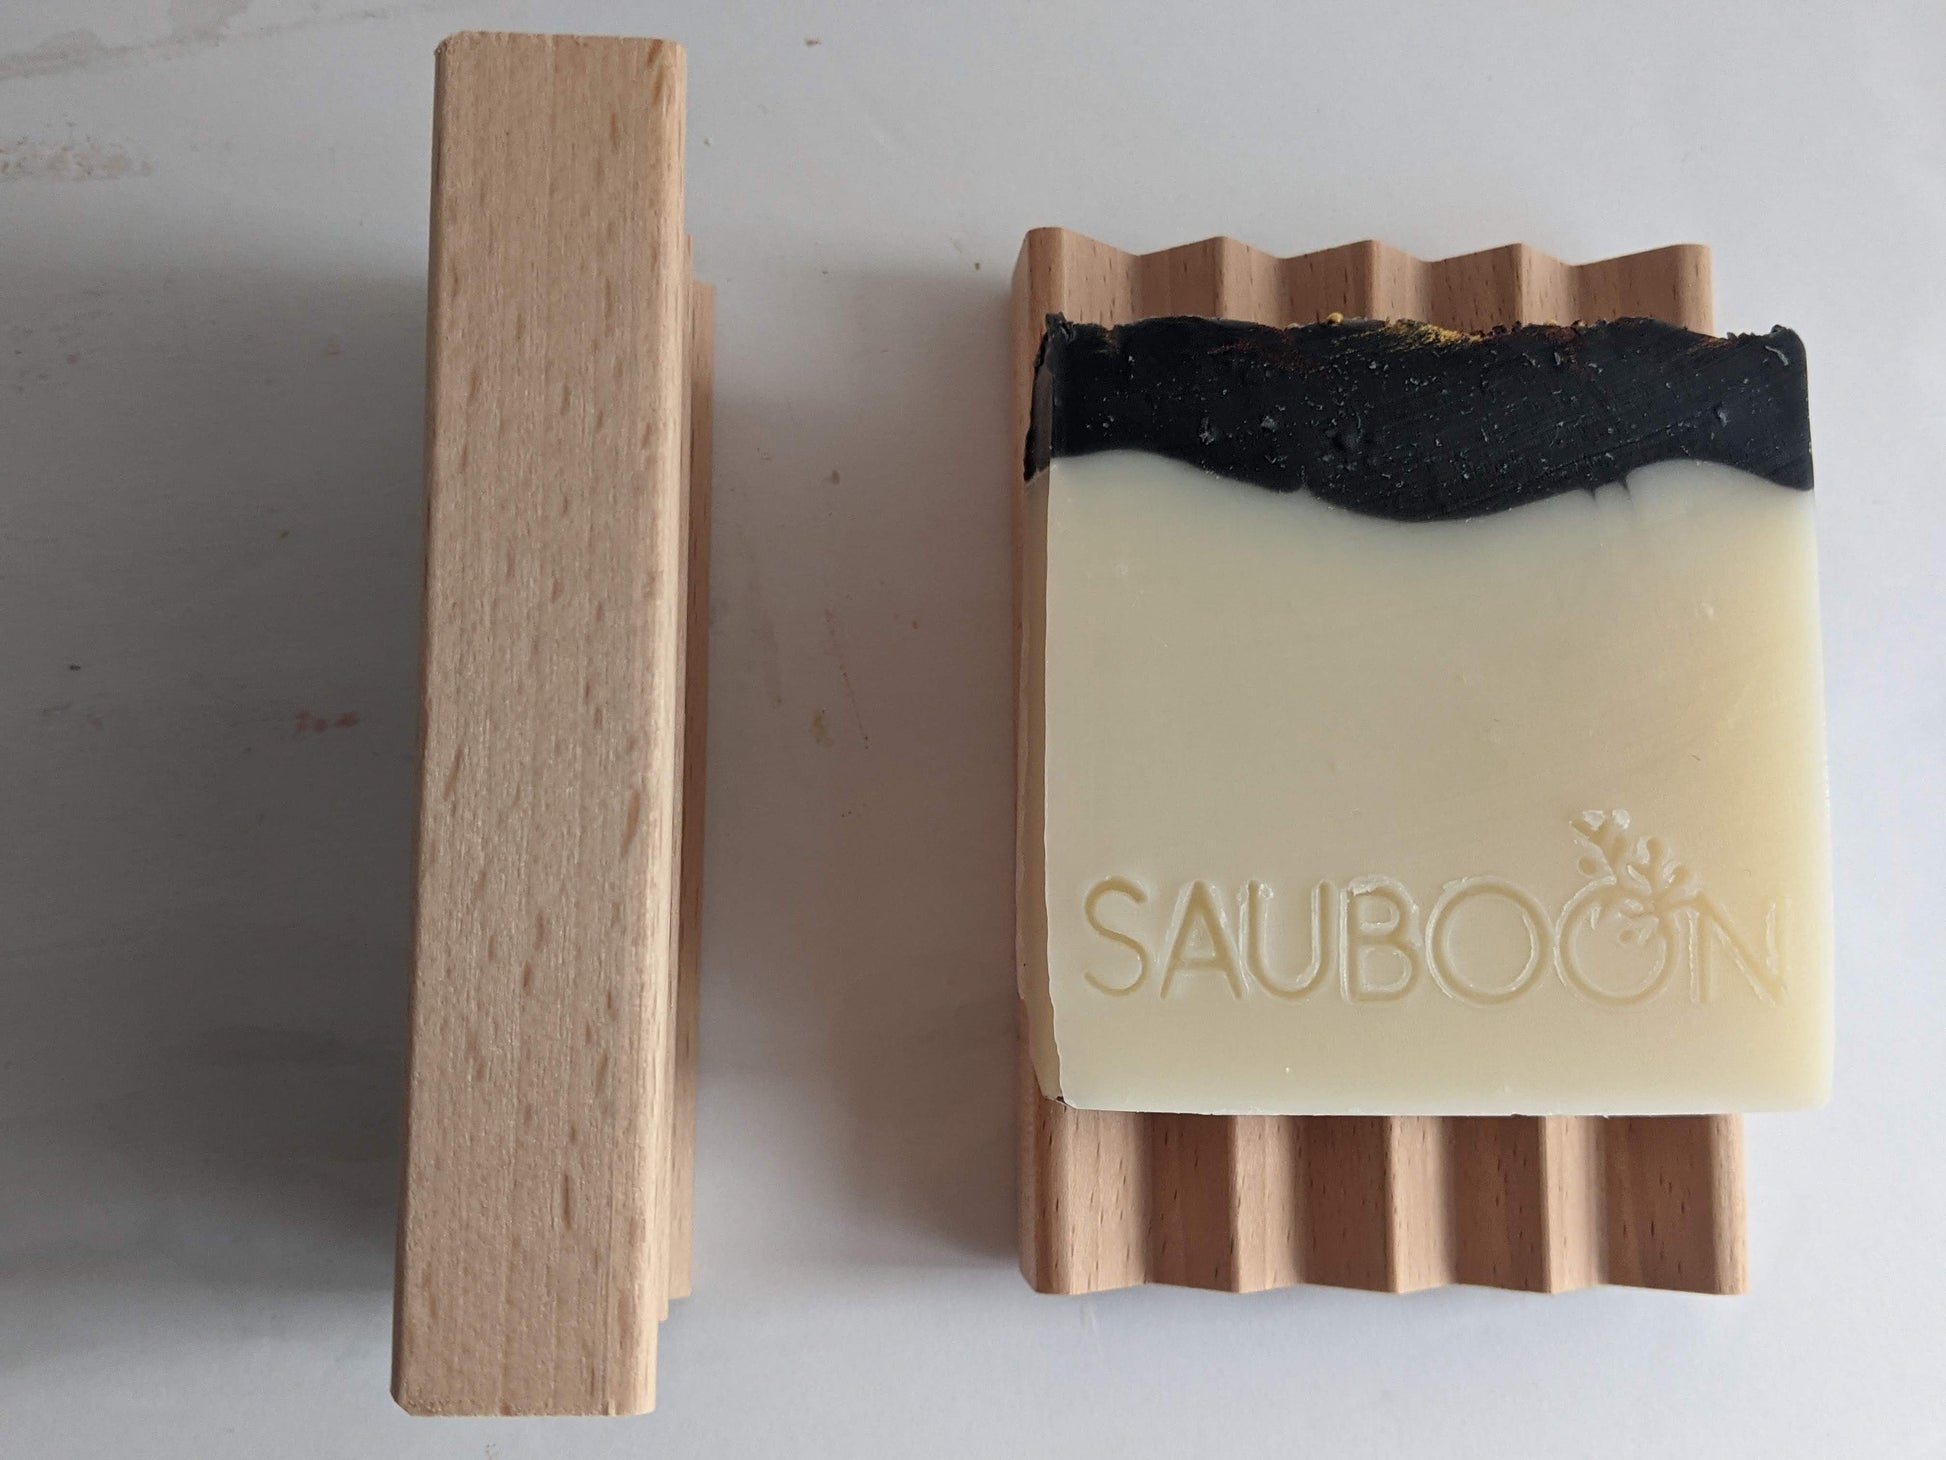 Handcrafted soap dish made in the USA.  Hardy beechwood, allows for a long life while using handcrafted soaps.  The grooves allow for water to drain away, keeping the soap dry in between use.  Makes a fantastic gift along with our luxurious handcrafted soaps, made in small batches here in San Diego.